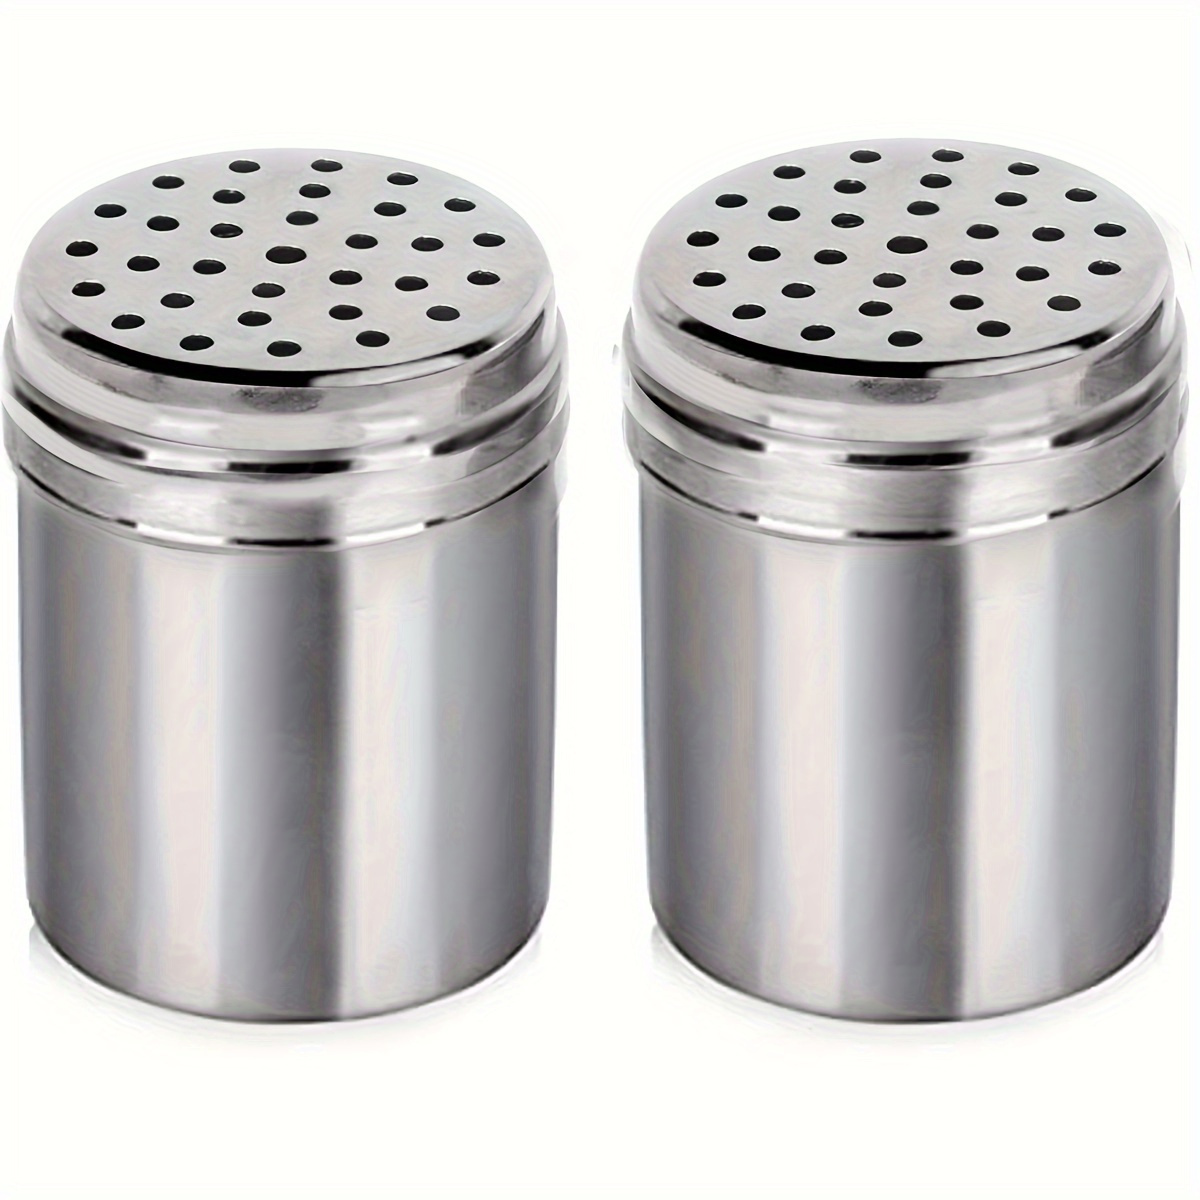 

2pcs, Stainless Steel Dredge Shakers, Seasoning Jar, Spice Dispenser, For Kitchen And Food Service Seasoning Storage, Kitchen Utensils, Kitchen Supplies, Kitchen Accessories, Kitchen Stuffs